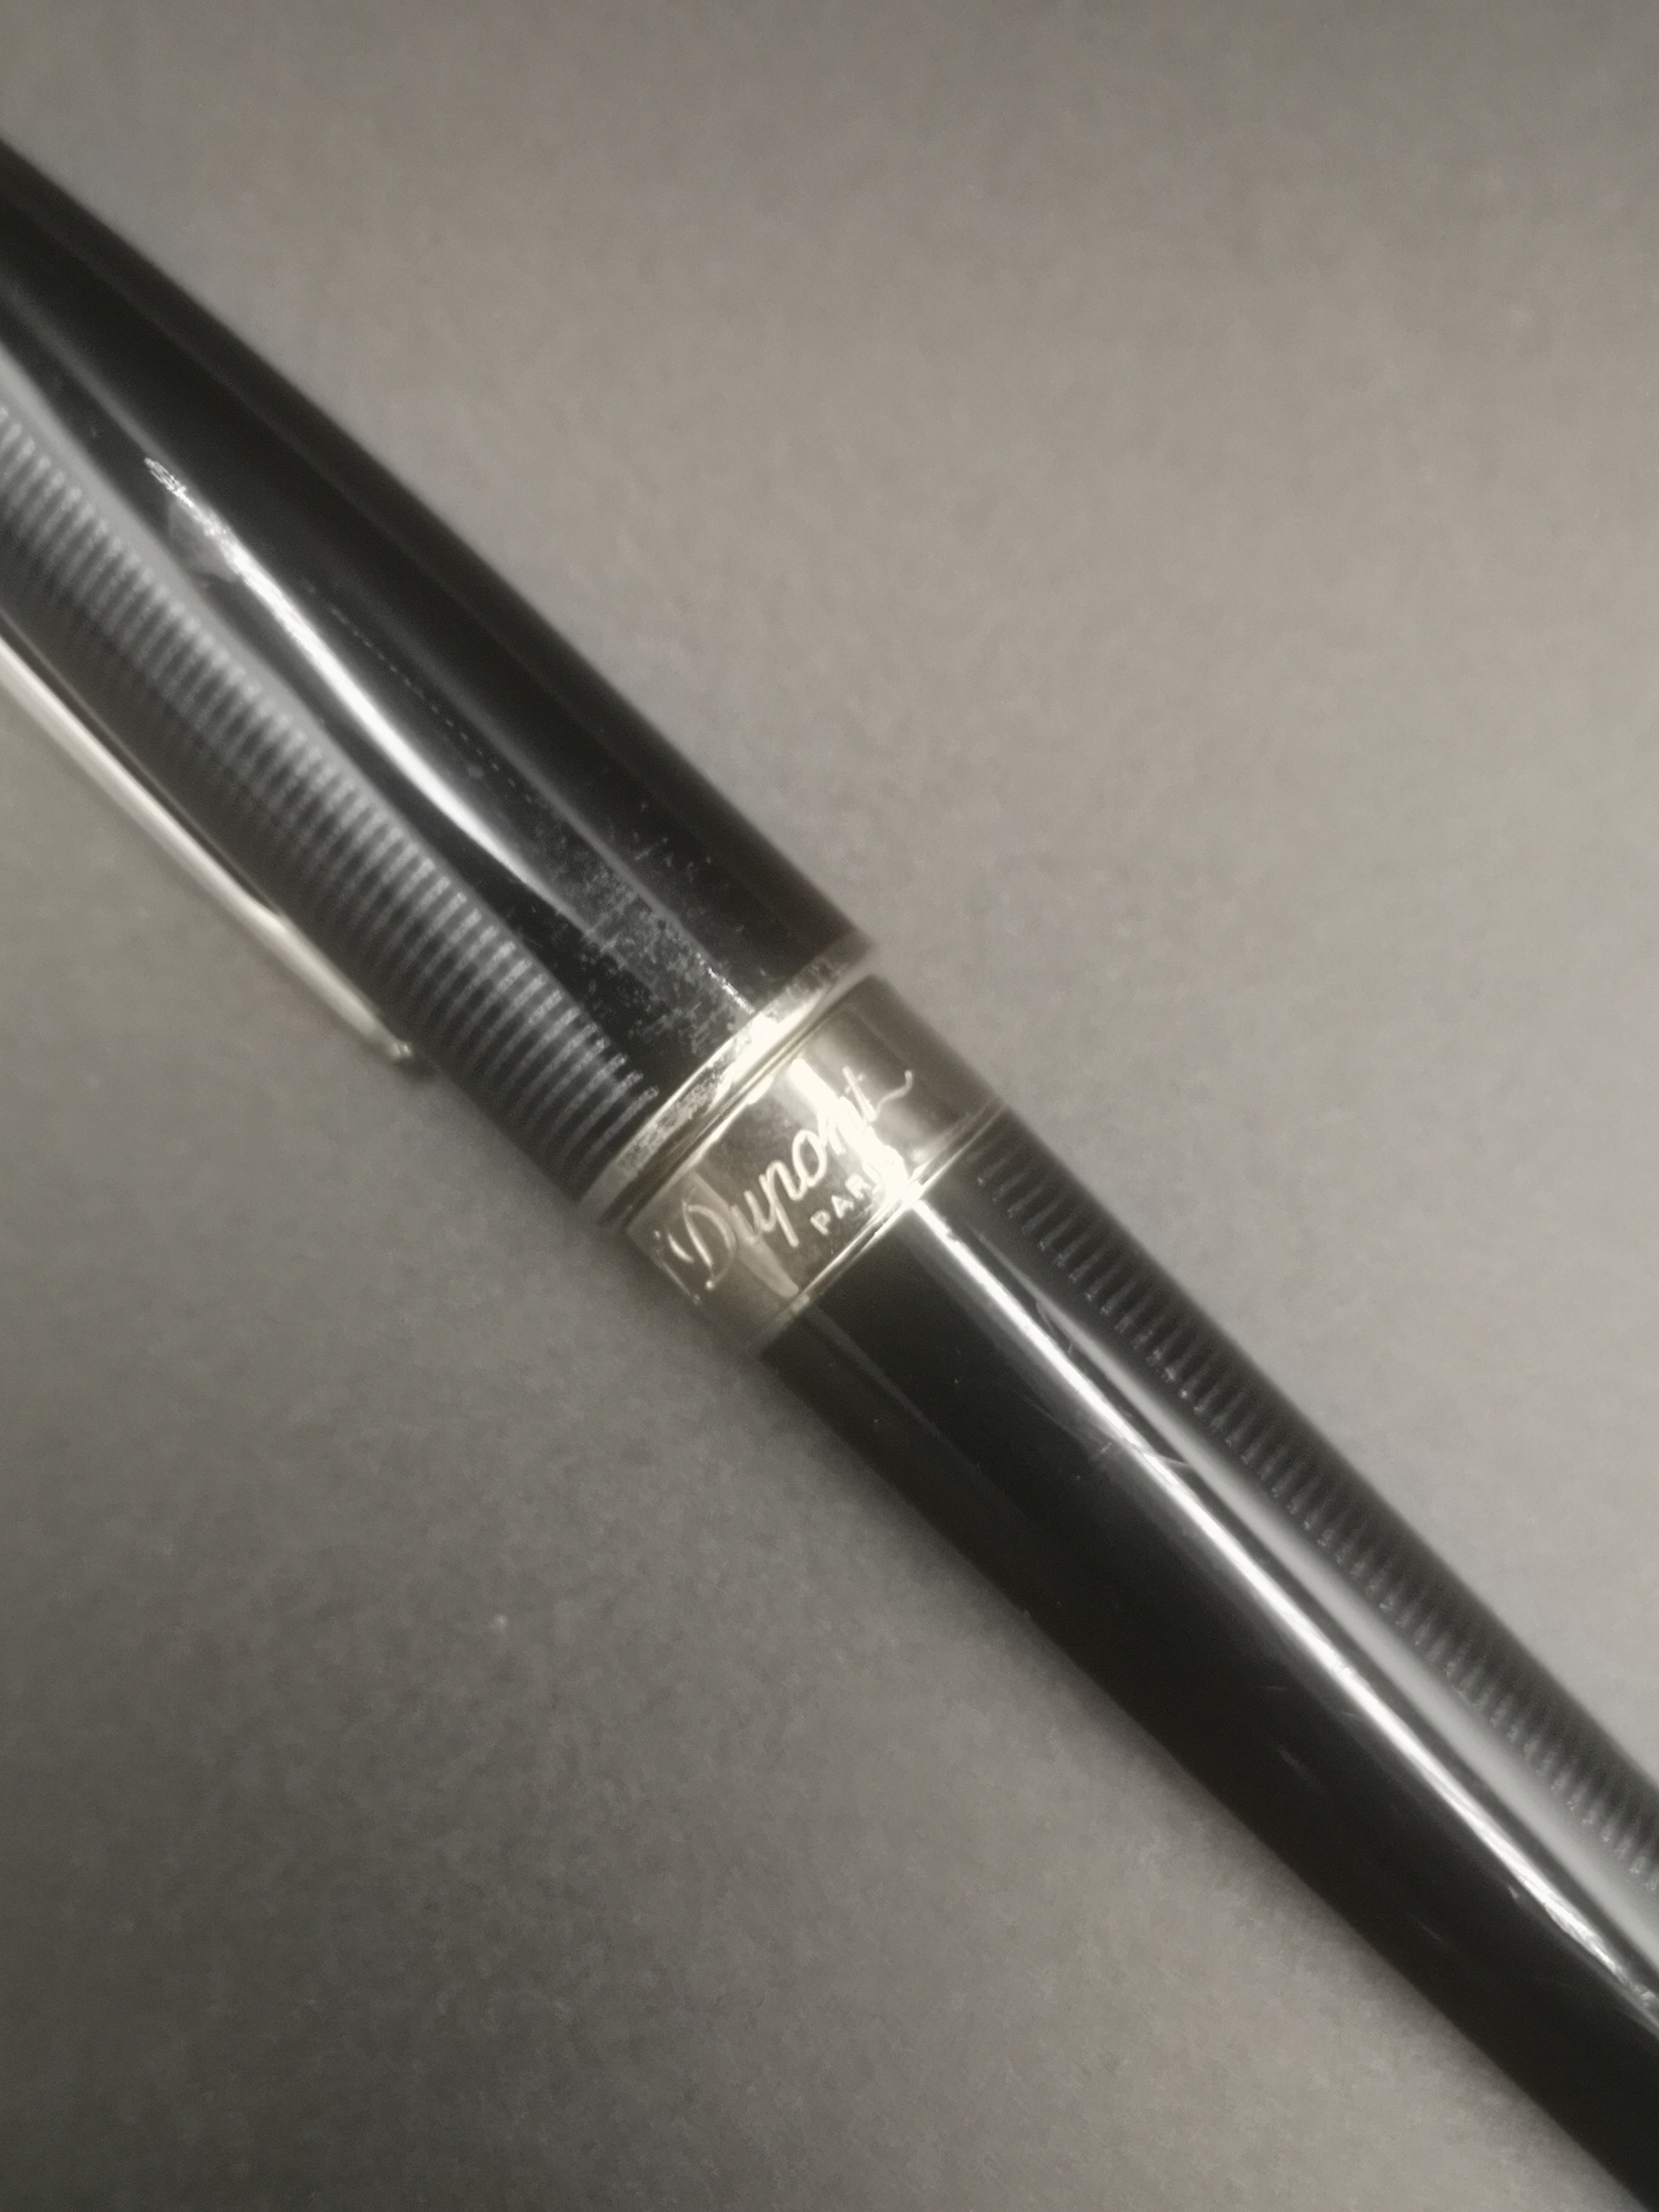 S. T. Dupont 007 fountain pen - Image 3 of 5